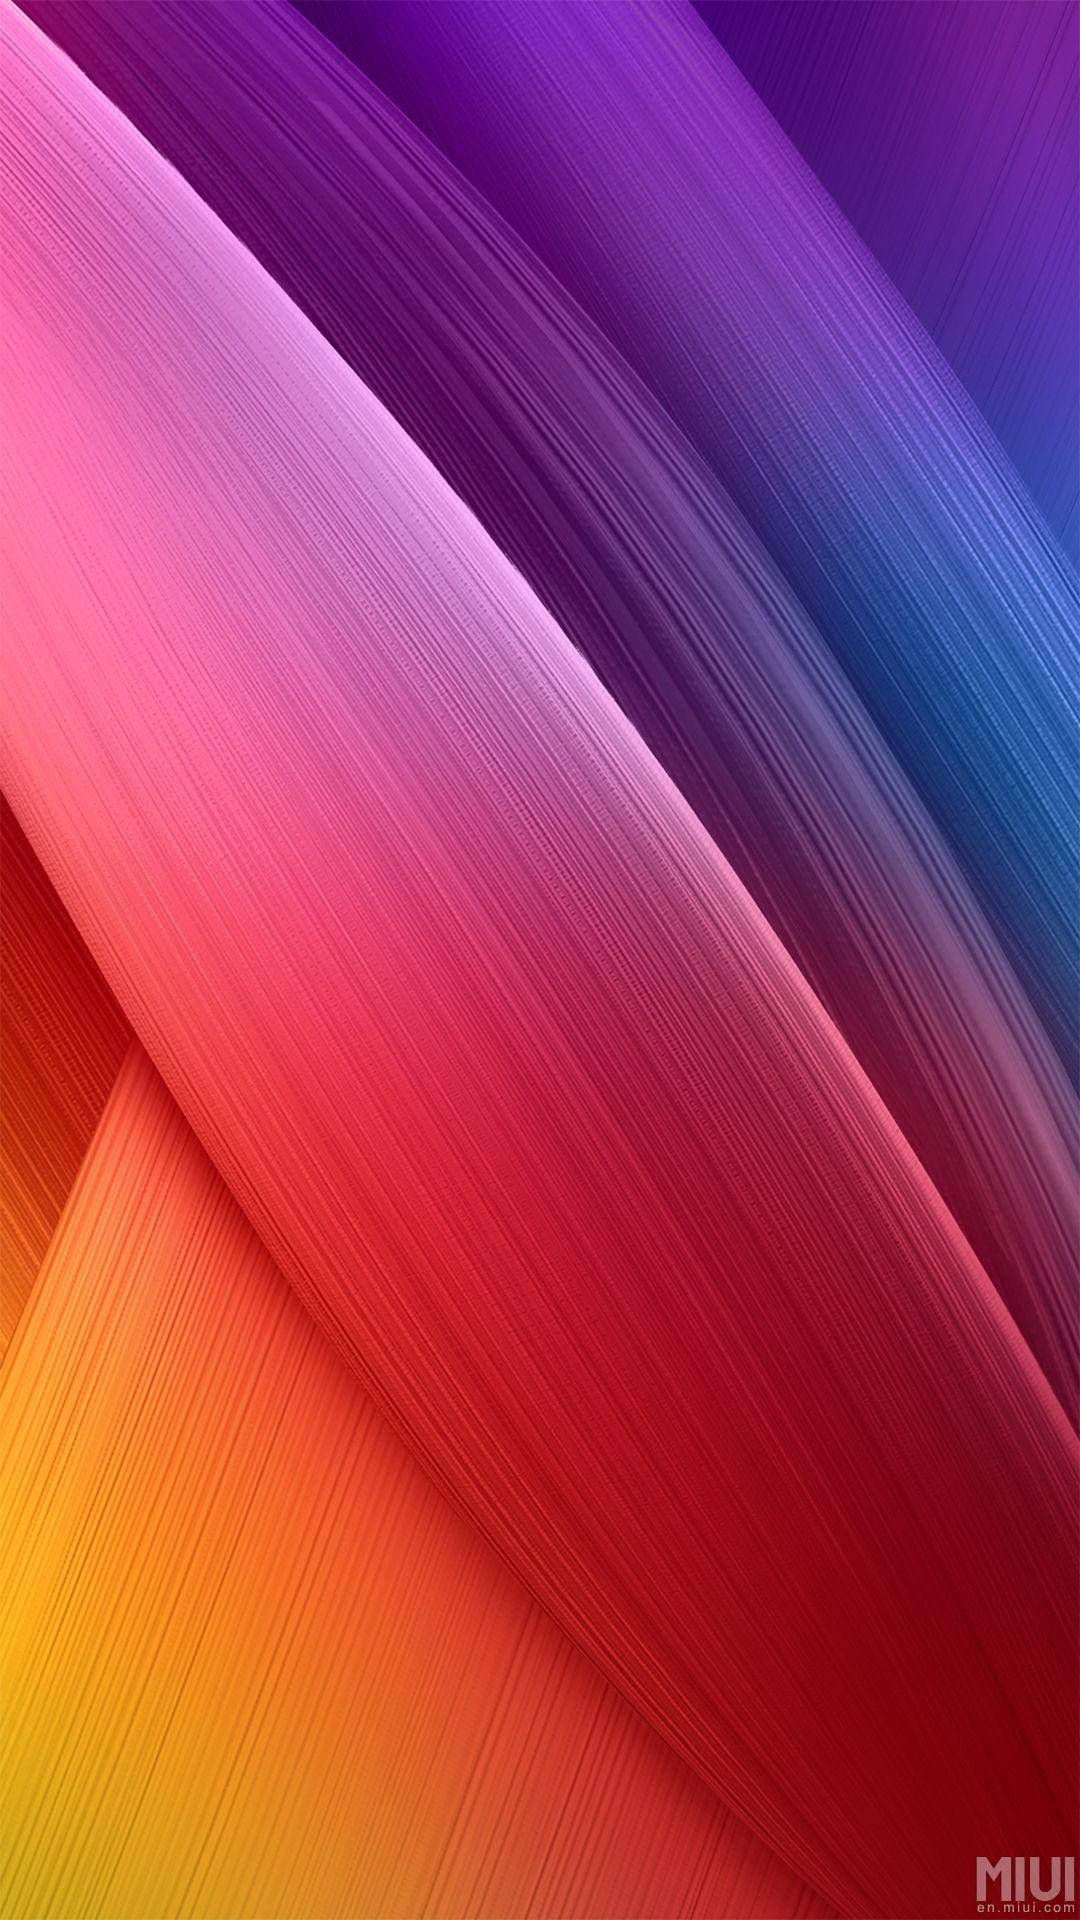 Radiant MIUI Wallpaper with Purple, Orange, and Red Streaks Wallpaper